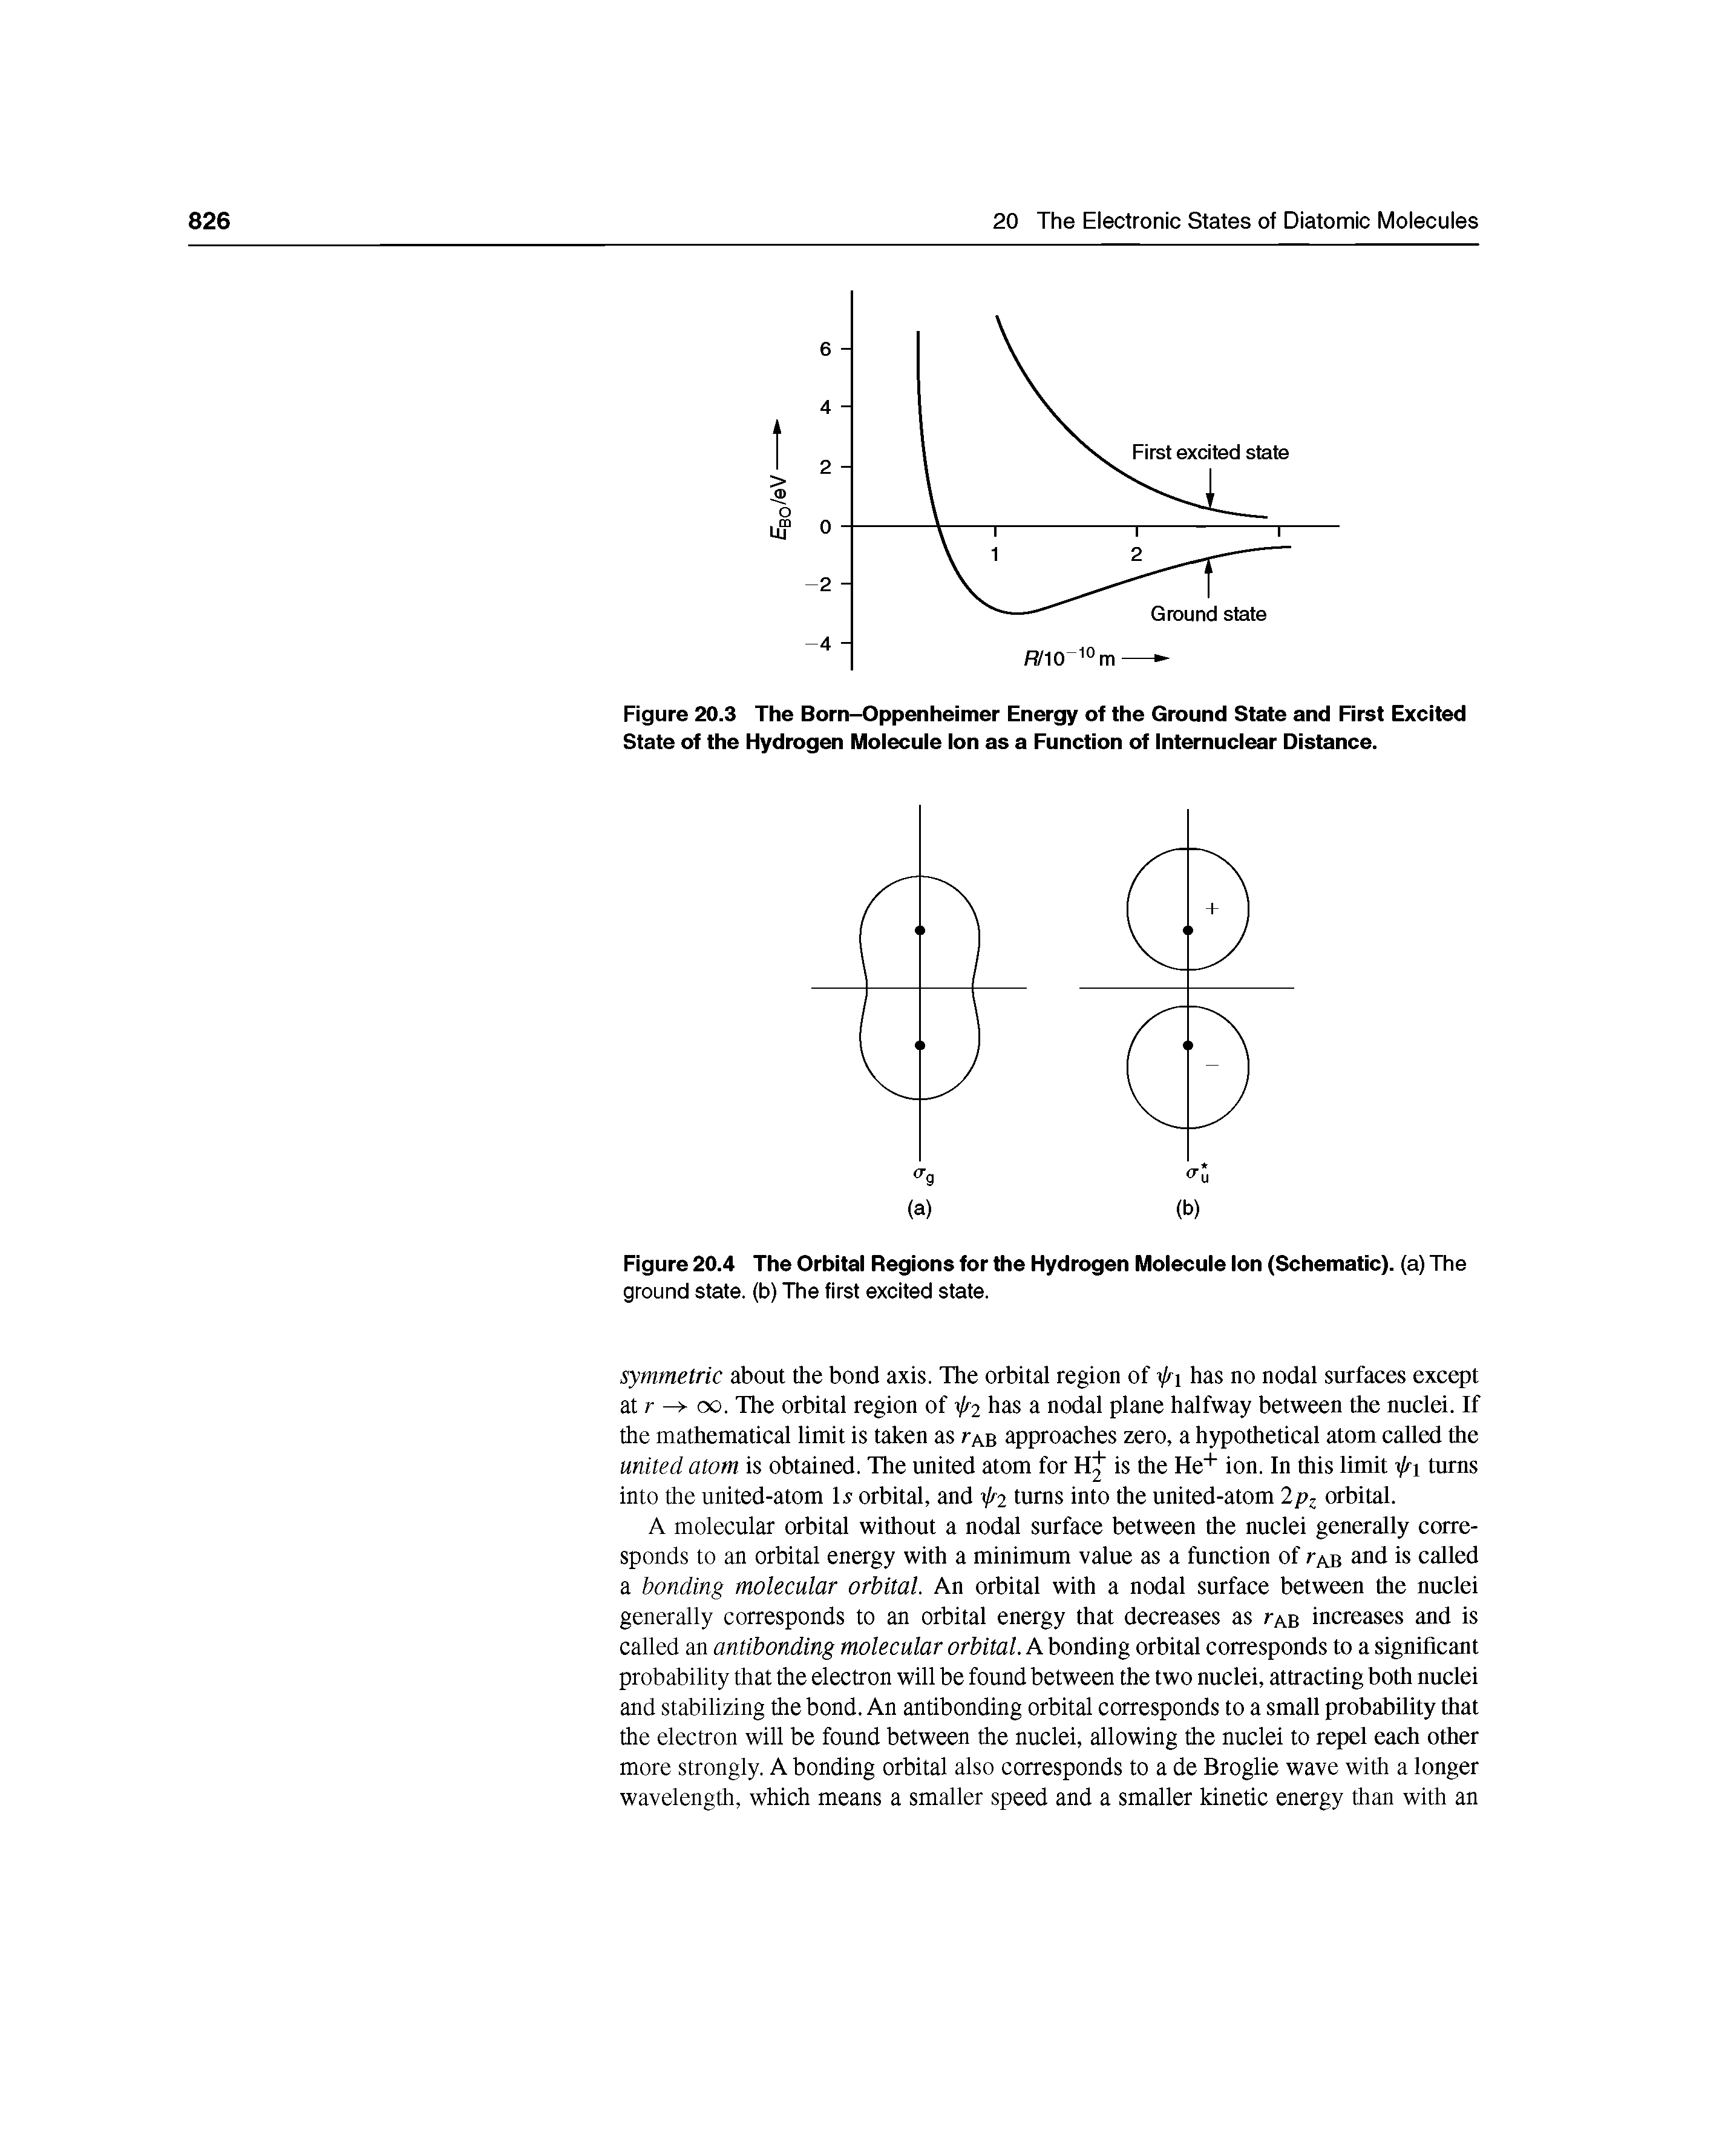 Figure 20.3 The Born-Oppenheimer Energy of the Ground State and Rrst Excited State of the Hydrogen Molecule Ion as a Function of Internuclear Distance.